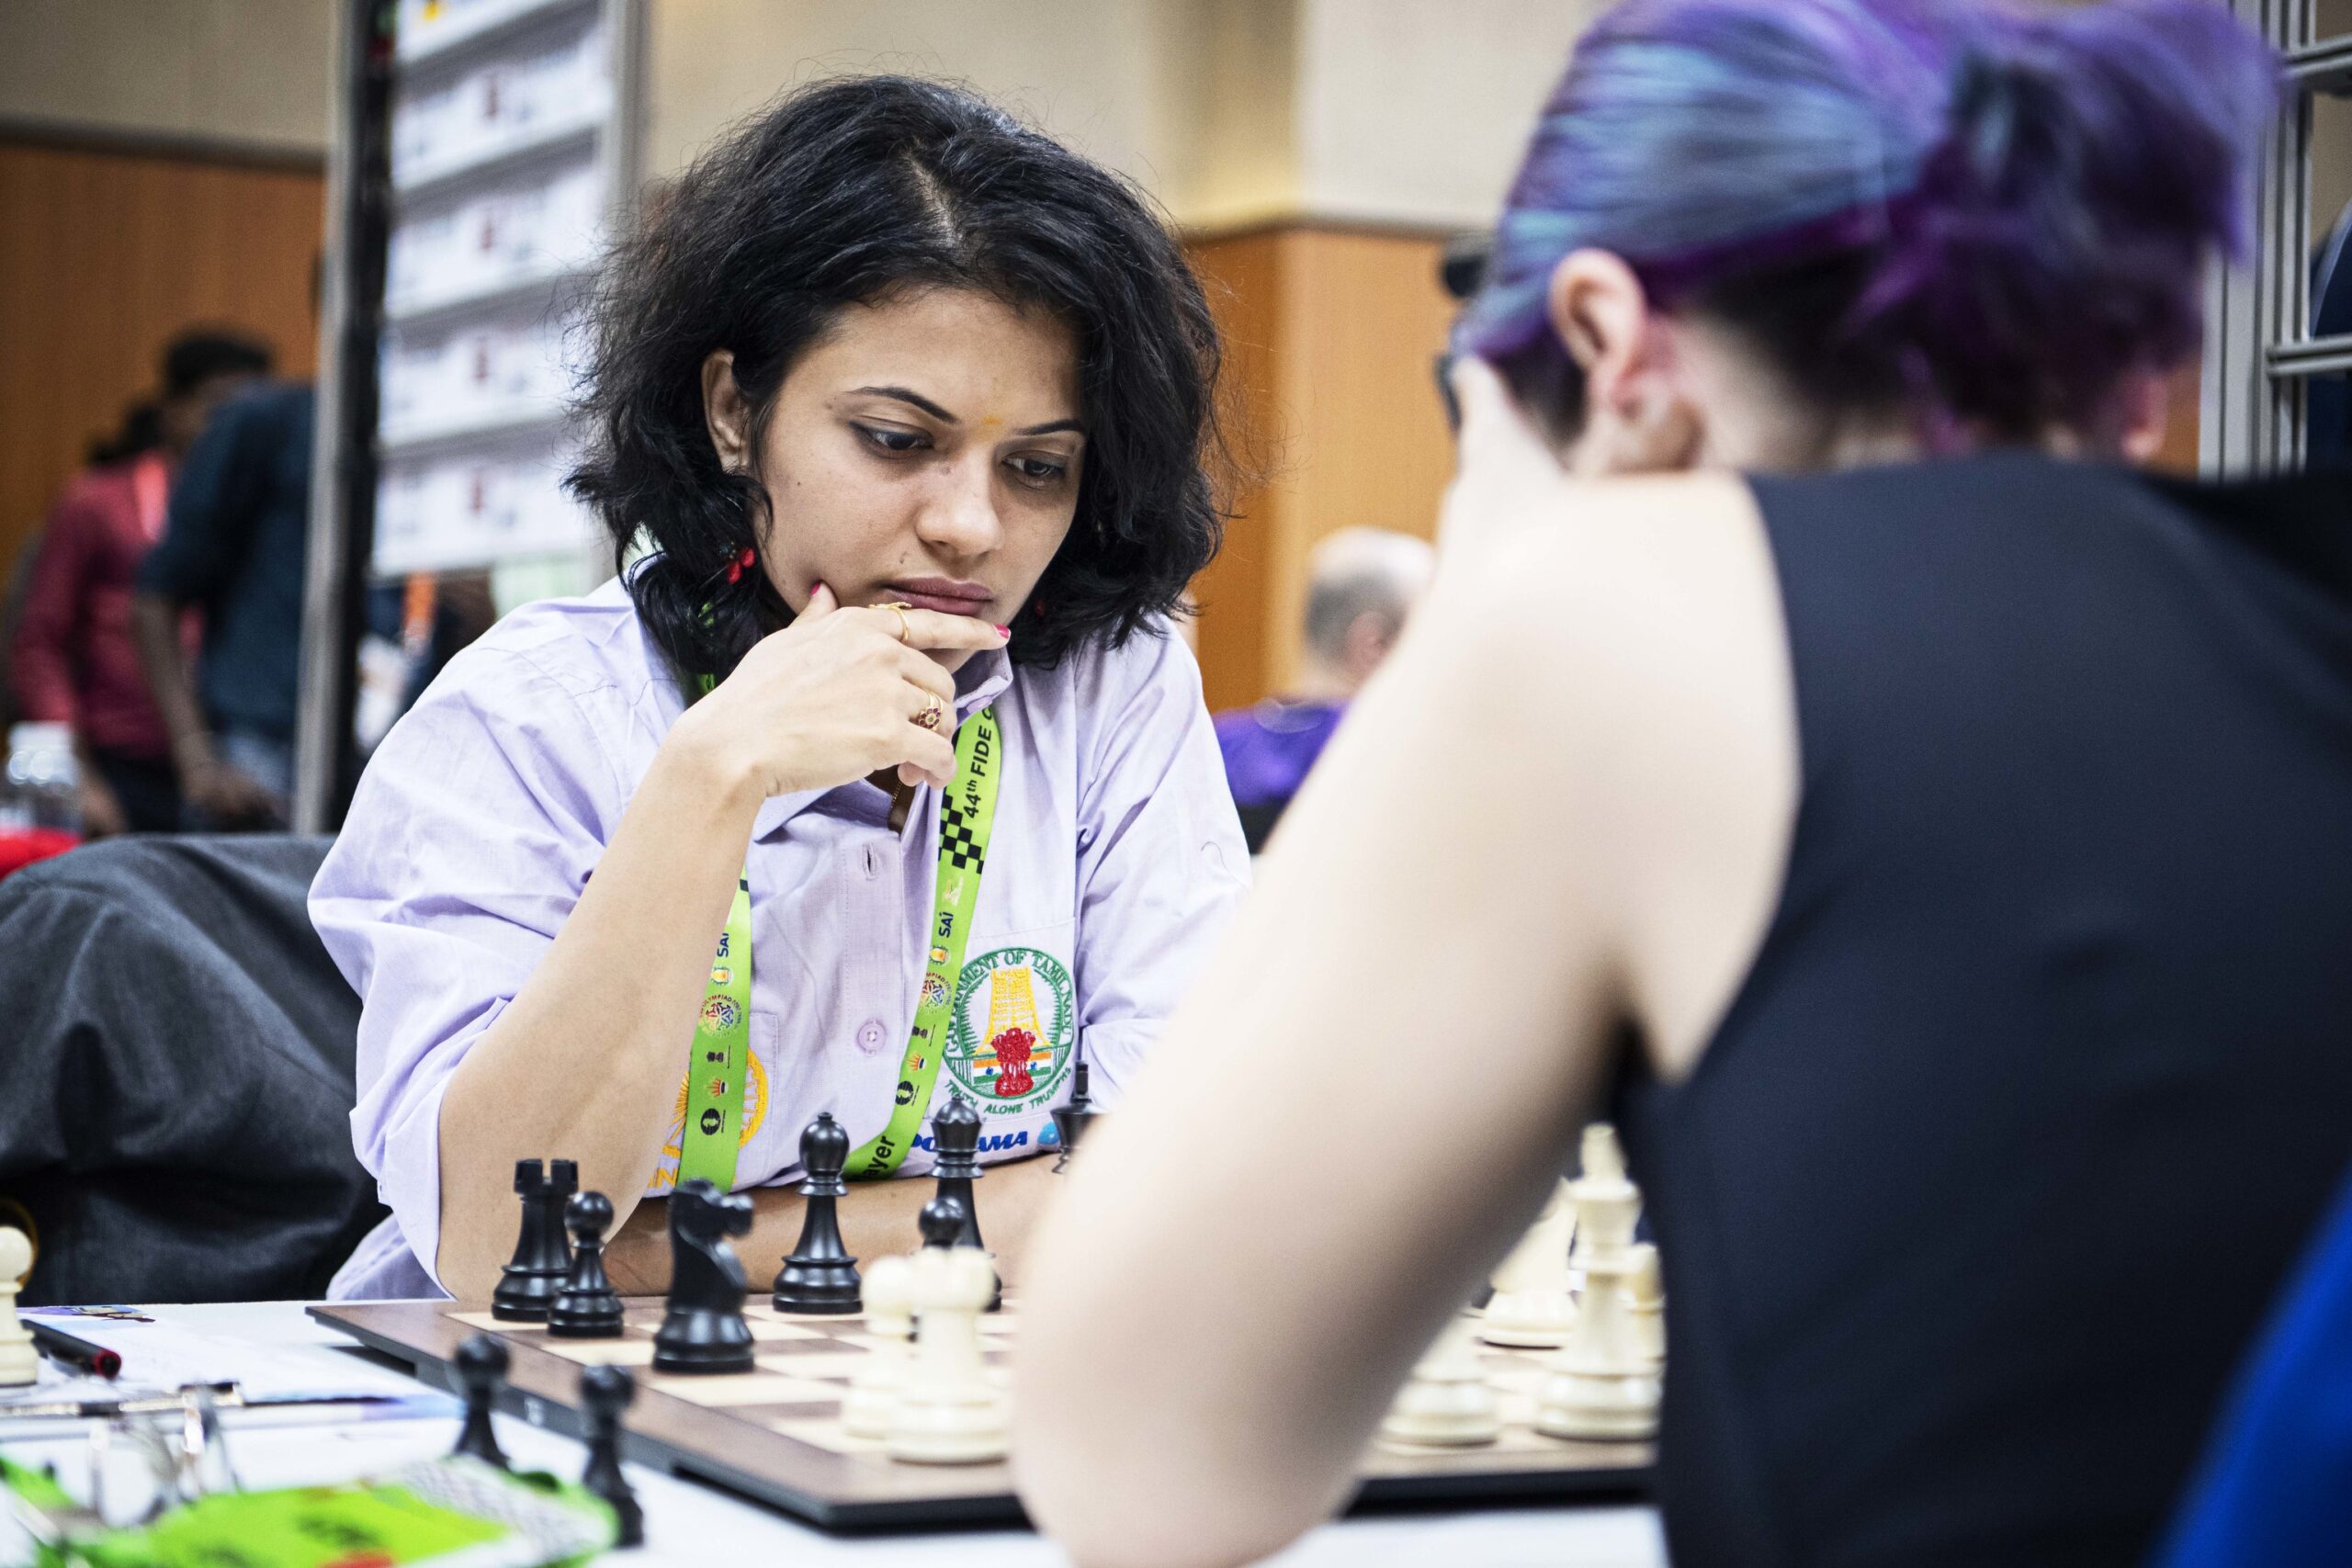 Event: 44th FIDE Chess Olympiad - Round 7 : r/chess